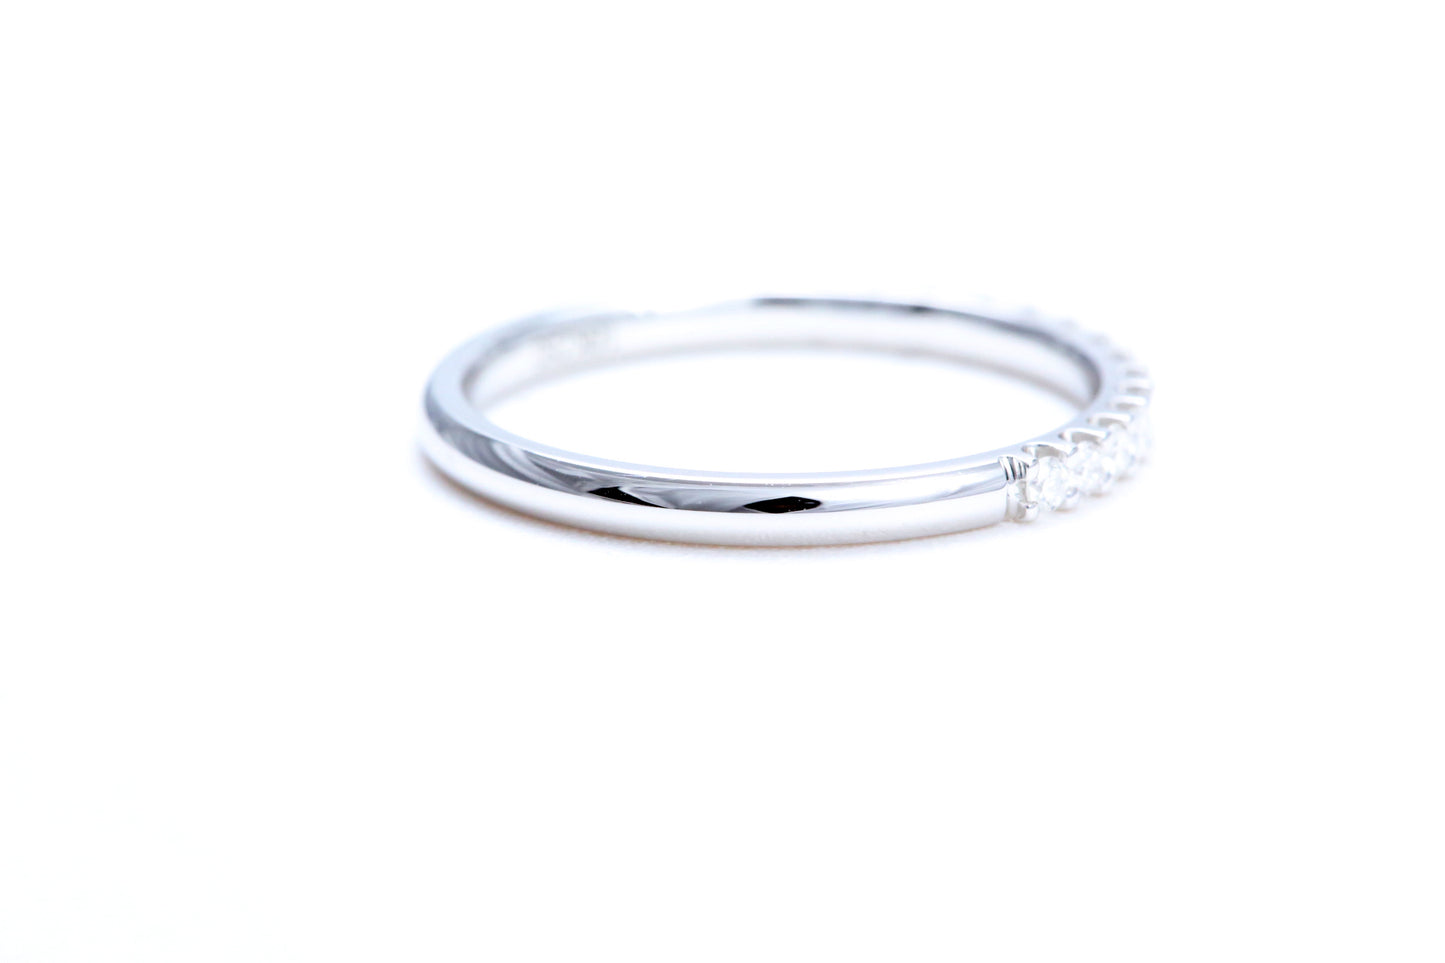 Load image into Gallery viewer, Minimalist Pavé Diamond Ring 1/4 of a carat total weight in 18K white gold
